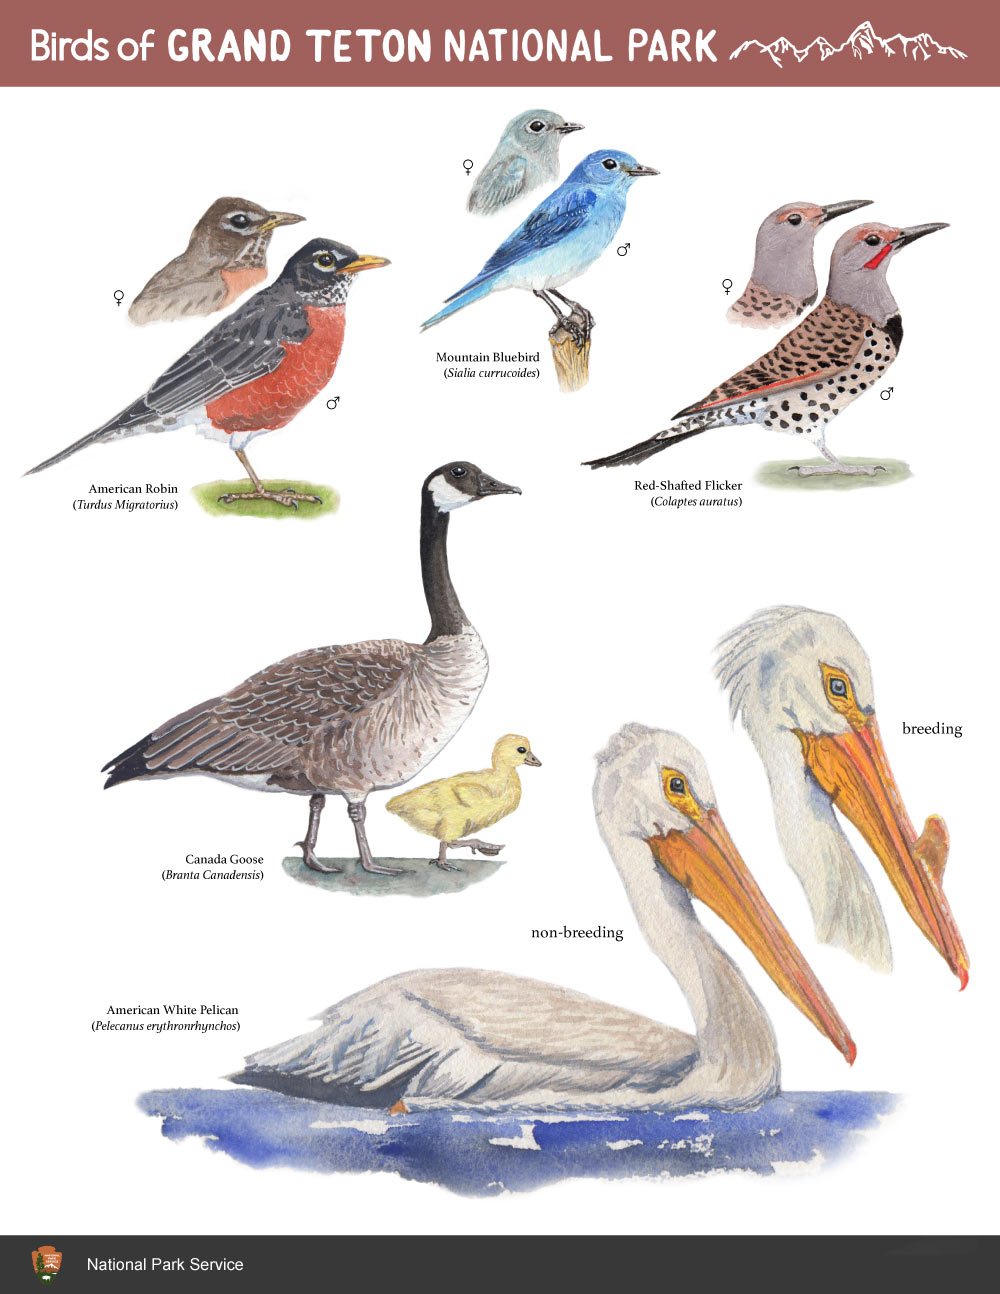  Field guide page created with watercolor, gouache, and InDesign as an assignment for CSUMB Science Illustration program. 